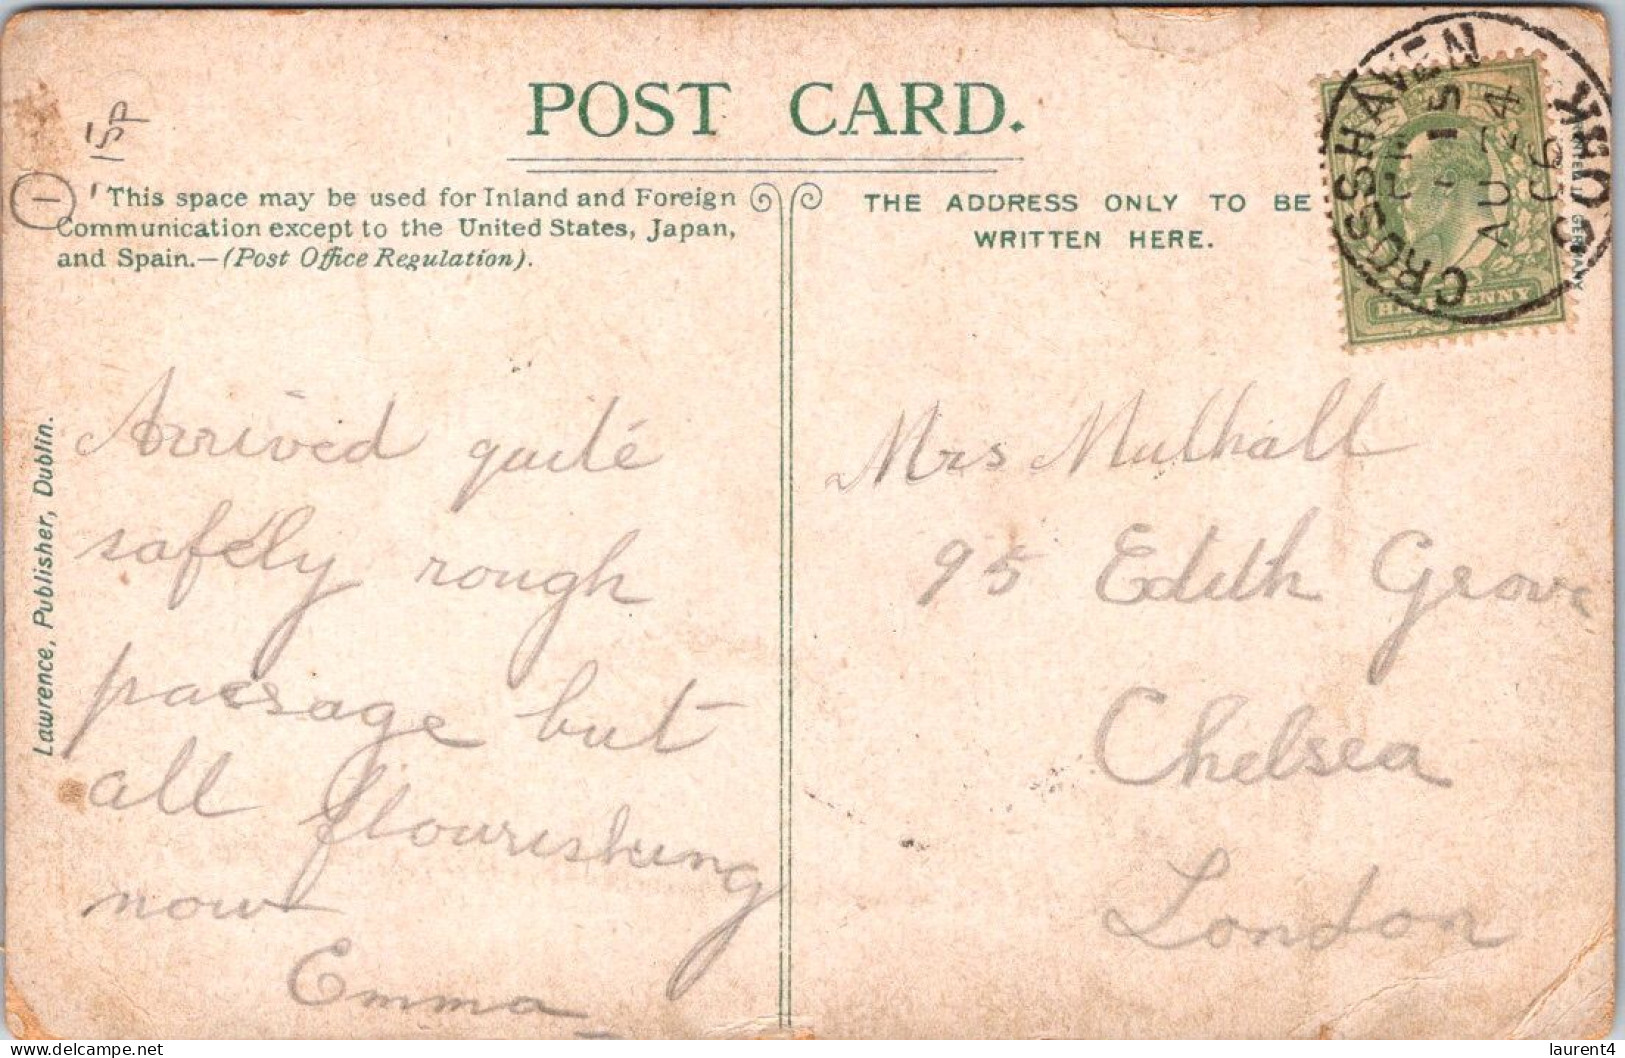 4-4-2024 (1 Z 1) Ireland (posted From Ireland To London 1906 ?) Crosshaven Co Cok - Cork